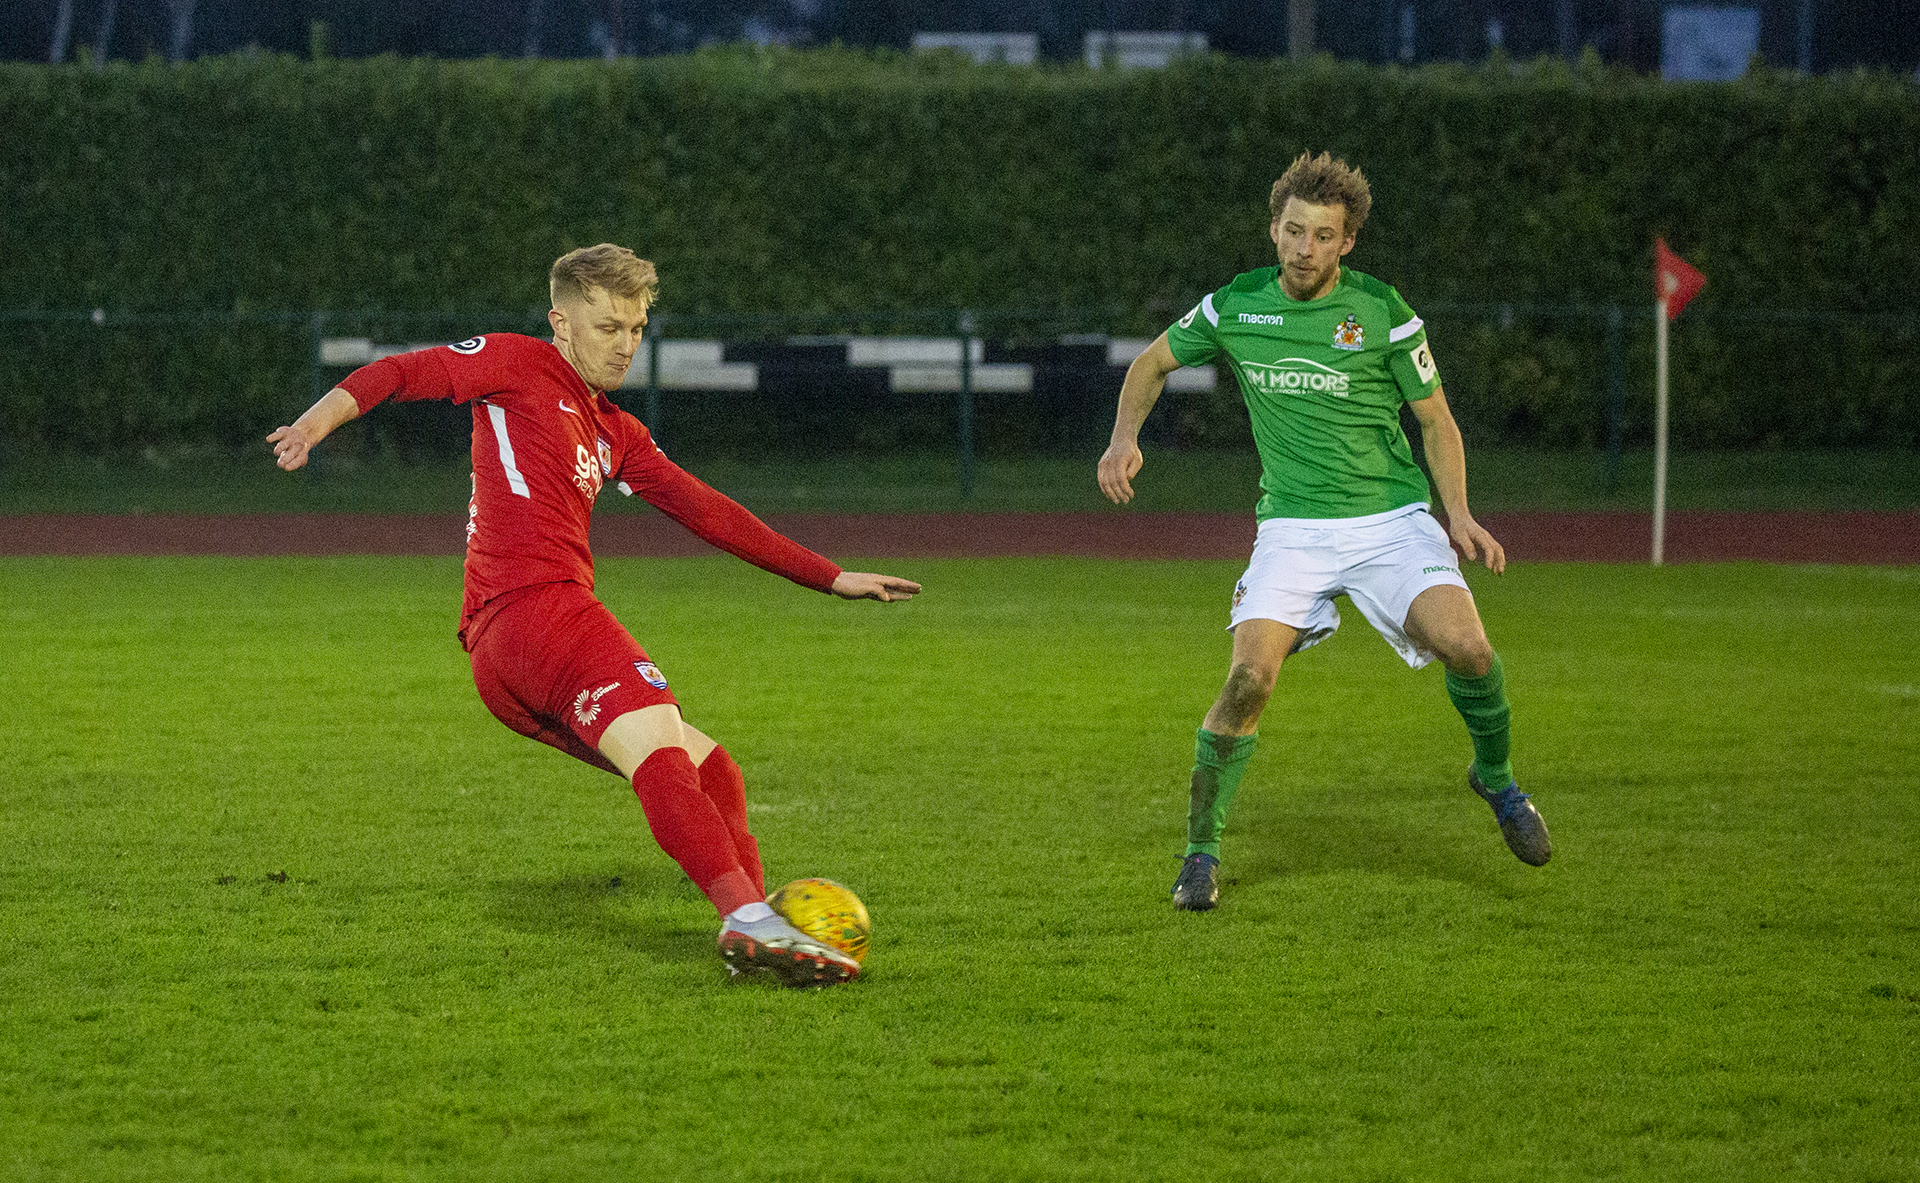 Declan Poole doubles The Nomads' lead in the 93rd minute | © NCM Media